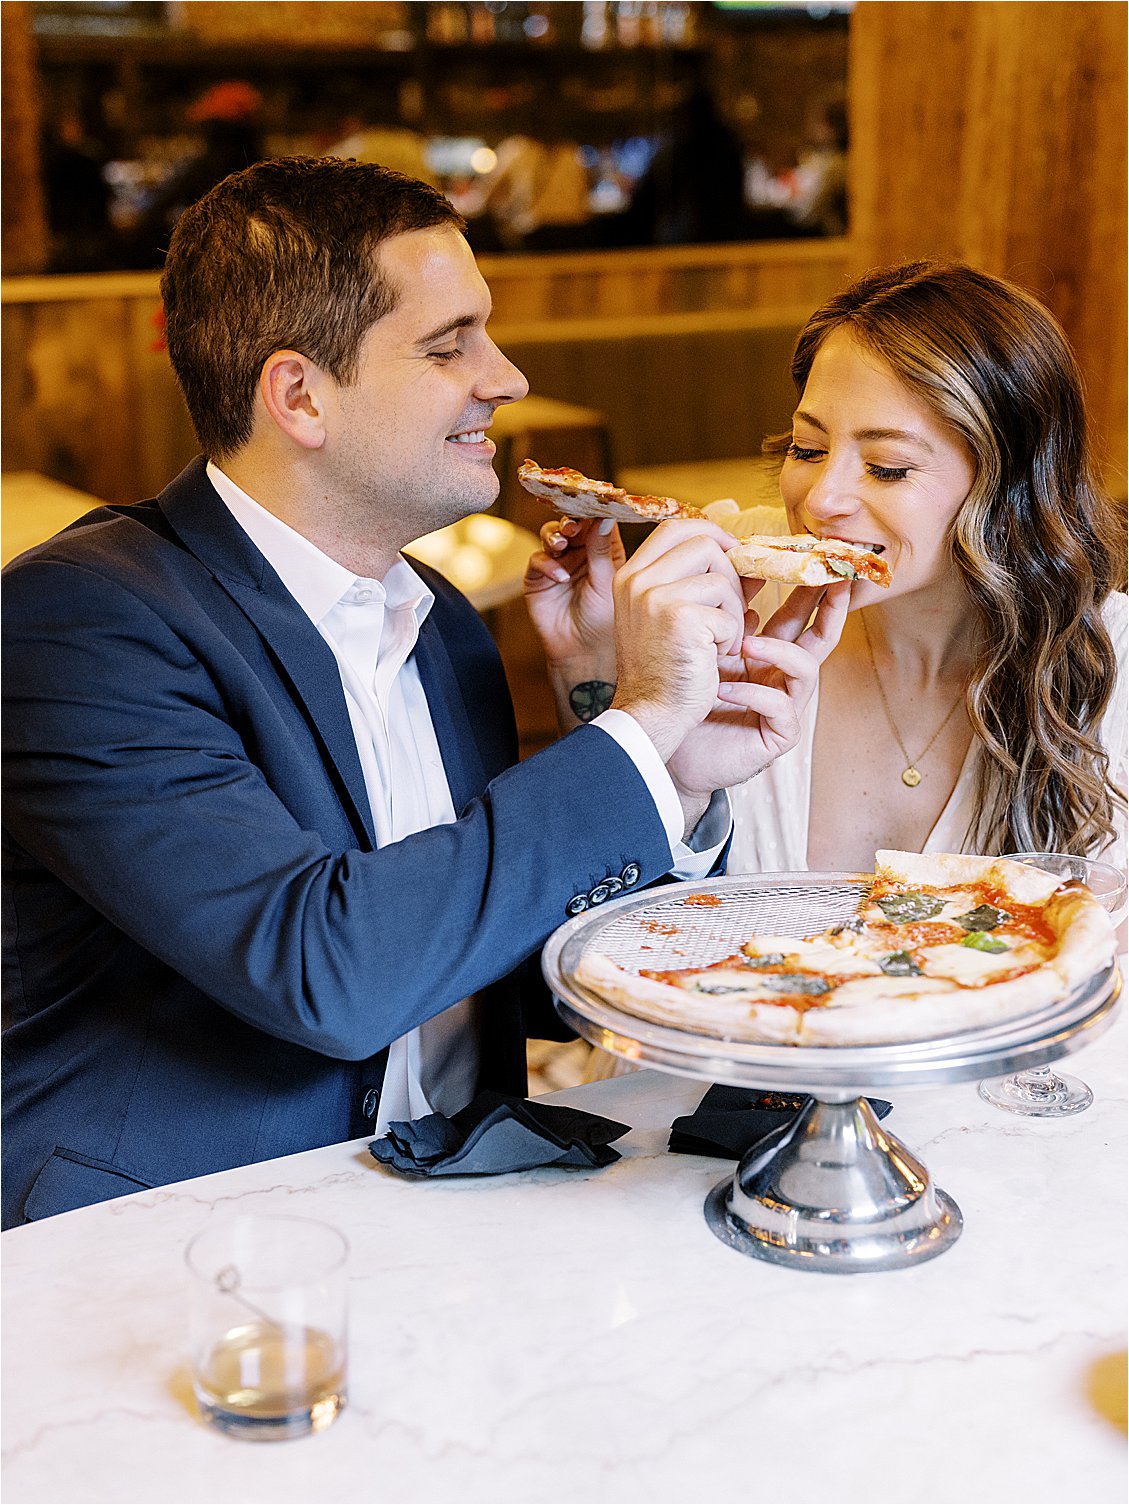 Couple shares a pizza during engagement session at Italian Disco in Fells Point Baltimore, Maryland